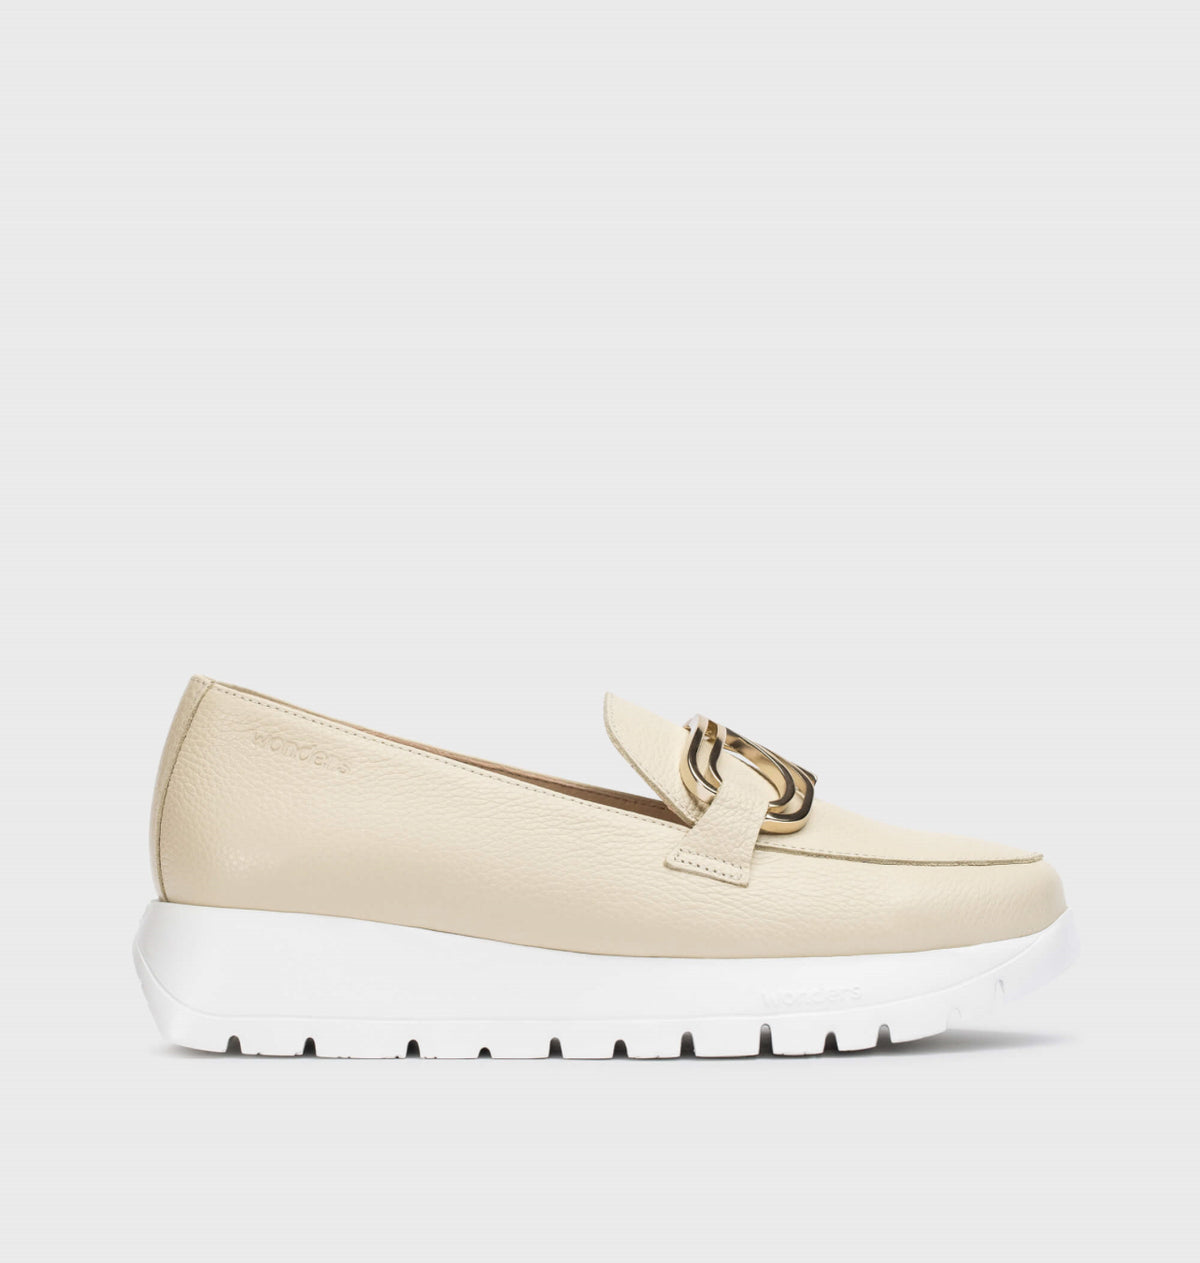 Wonders - A-2462 Beige Leather Wedge Moccasin